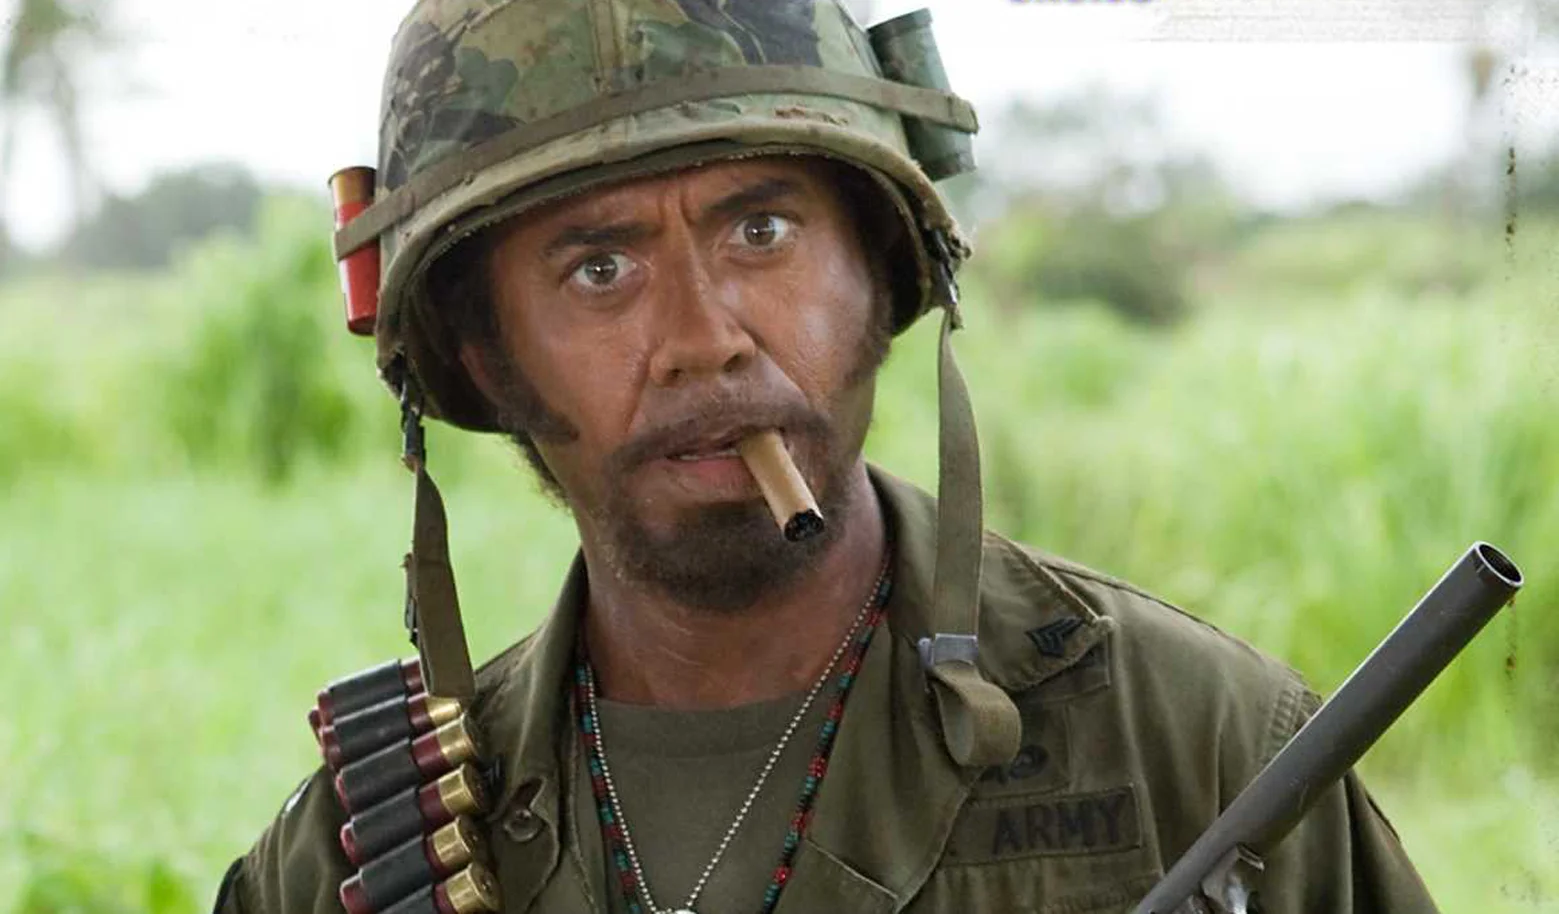 Tropic Thunder also featured Robert Downey Jr.